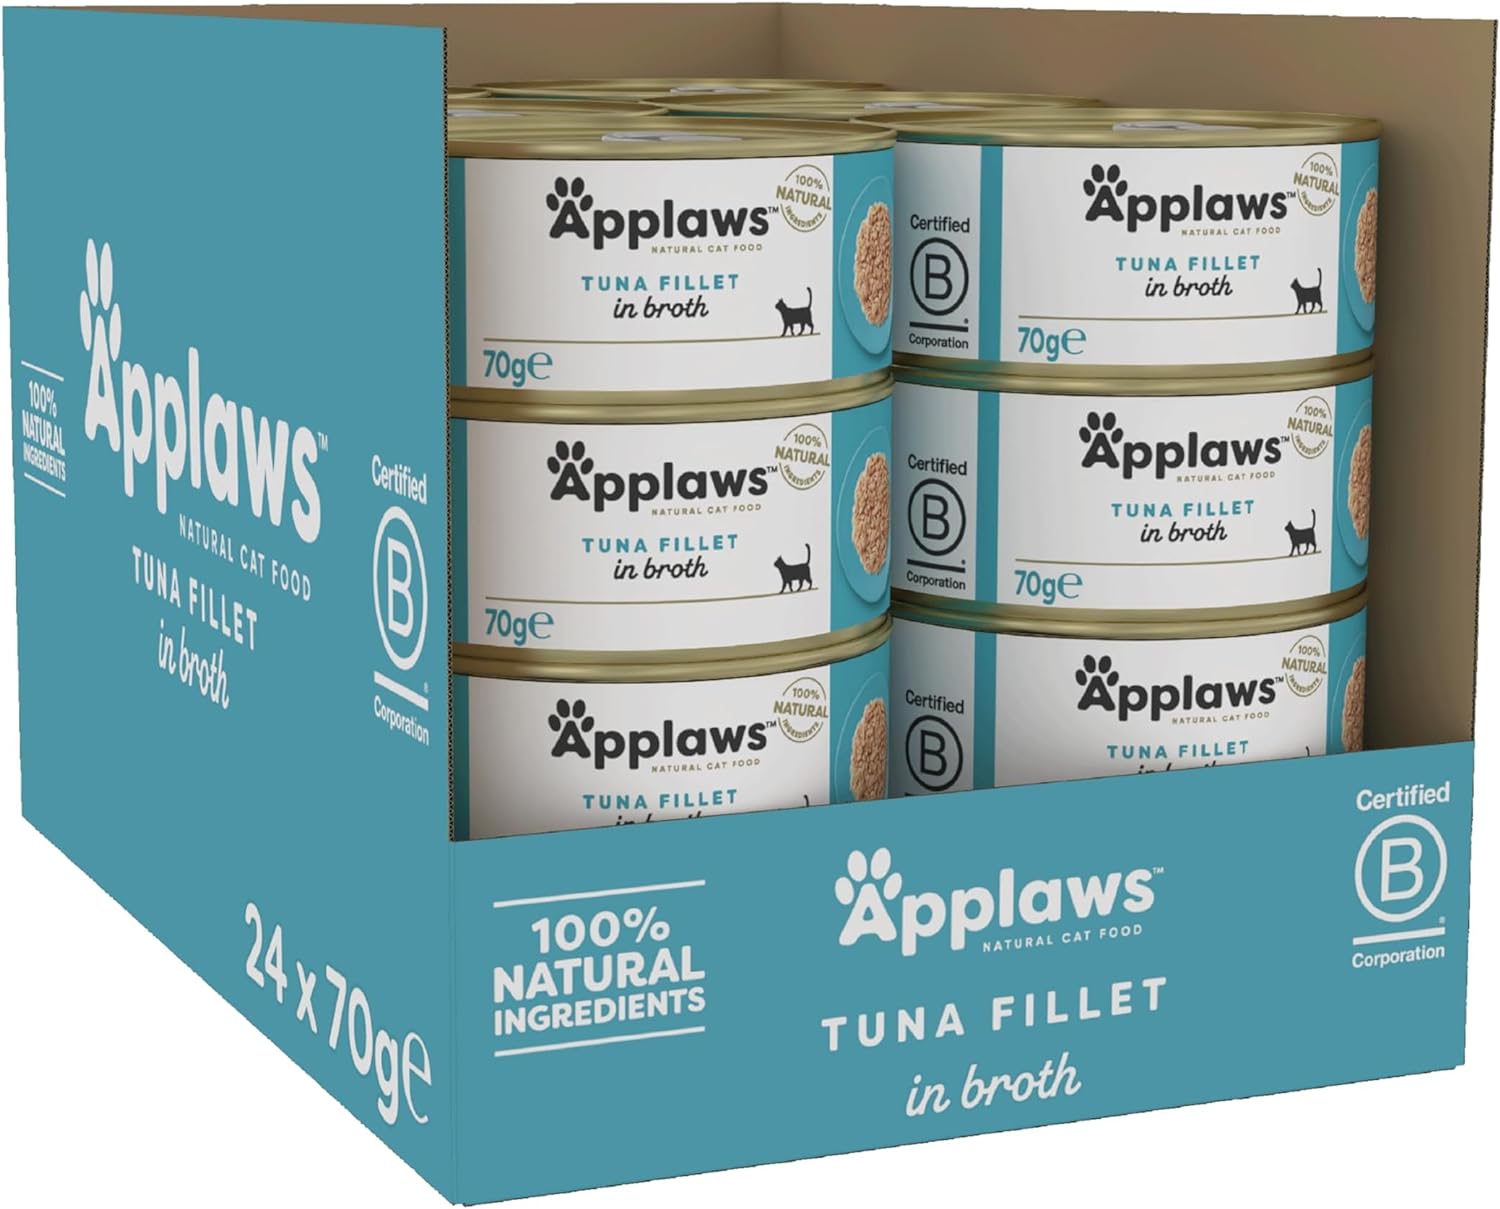 Applaws 100% Natural Wet Cat Food 24 x 70g Tuna Fillet Tins in Broth?1003CE-A